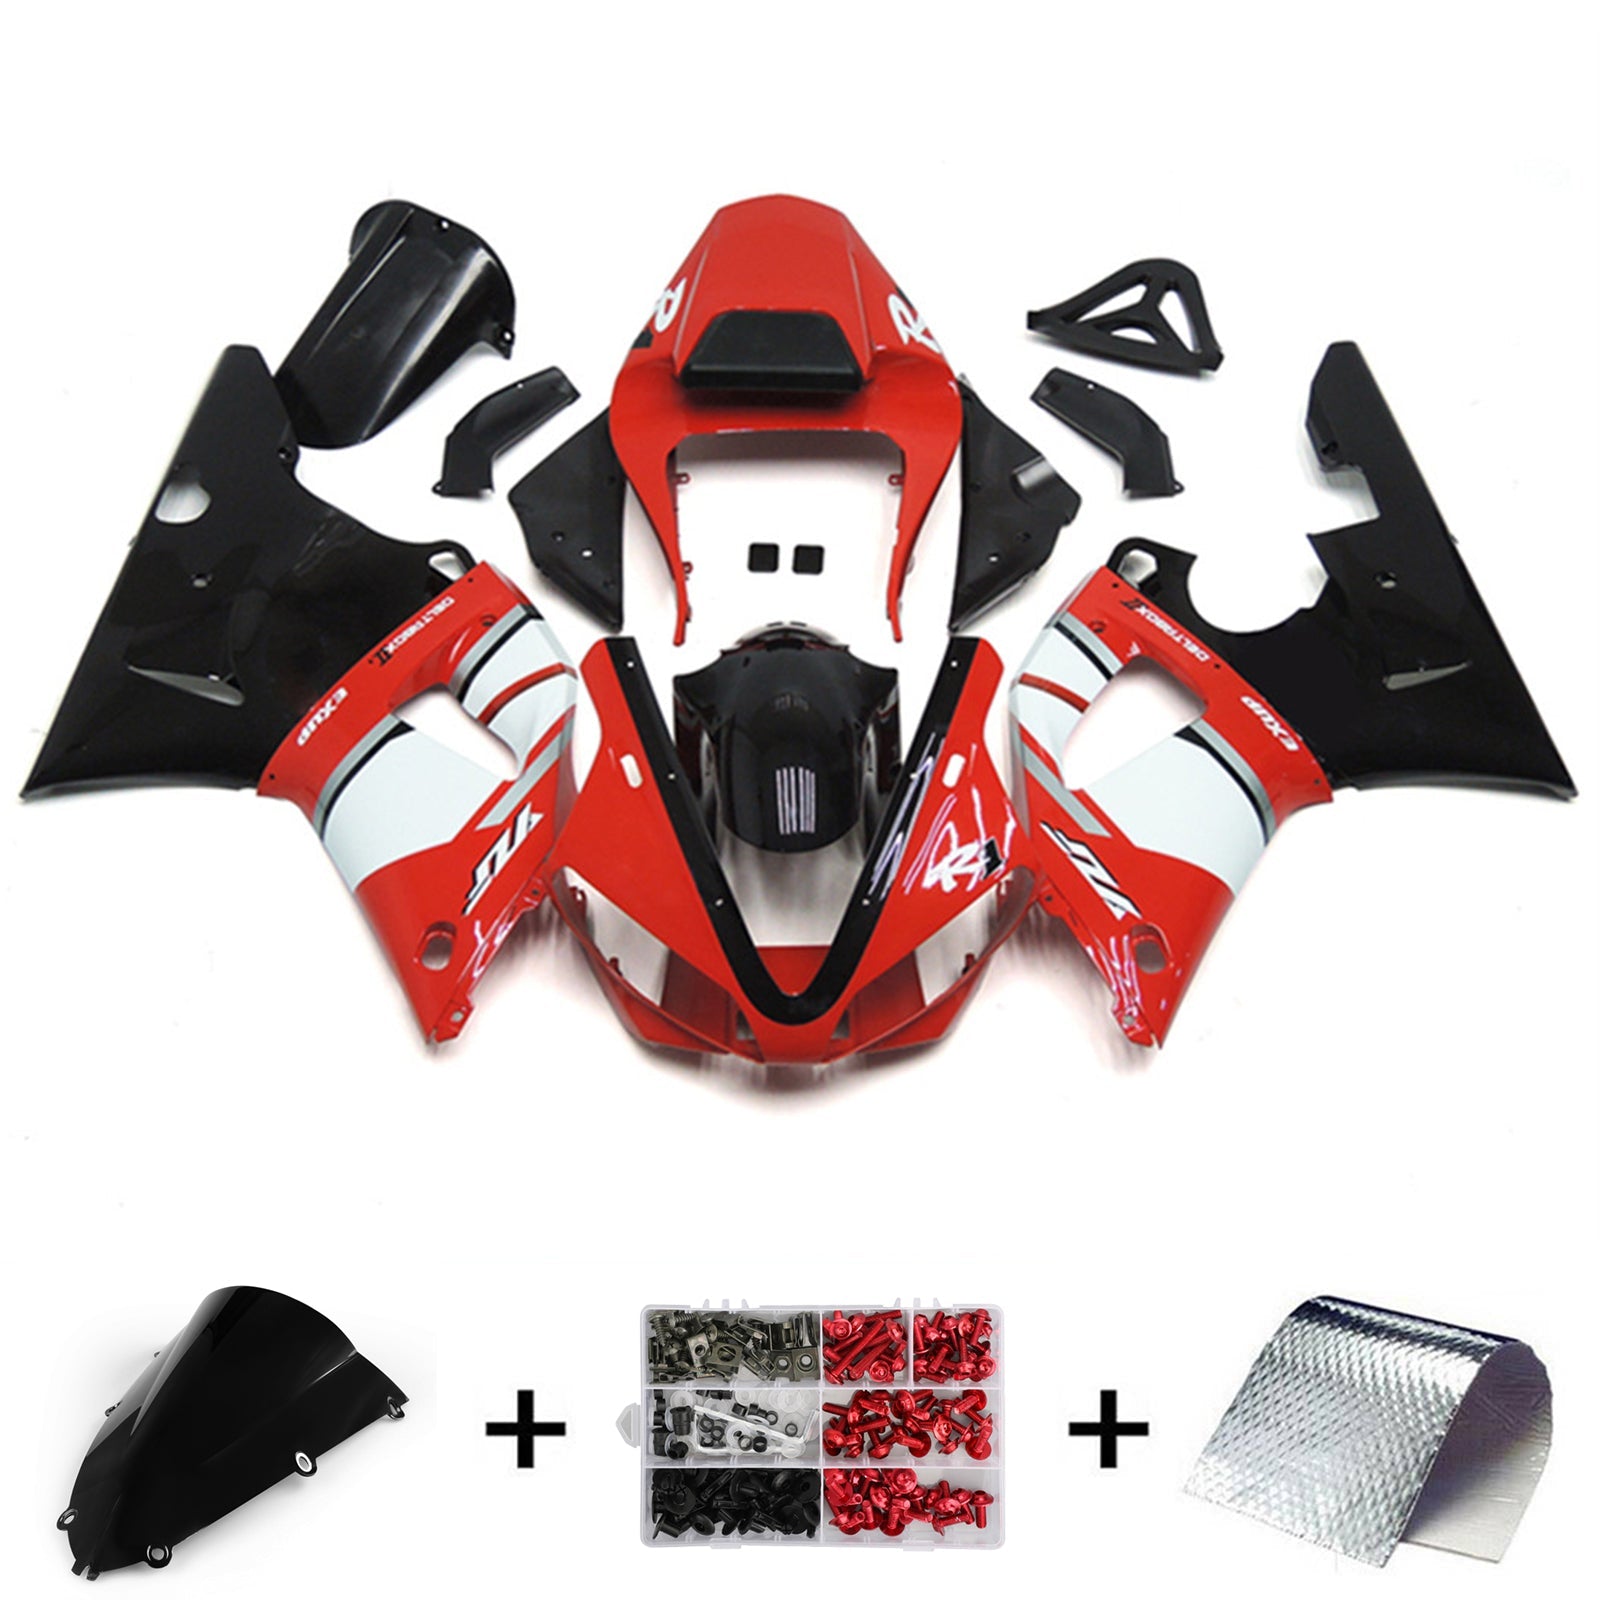 Amotopart Yamaha YZF 1000 R1 1998-1999 Kit carena carrozzeria in plastica ABS